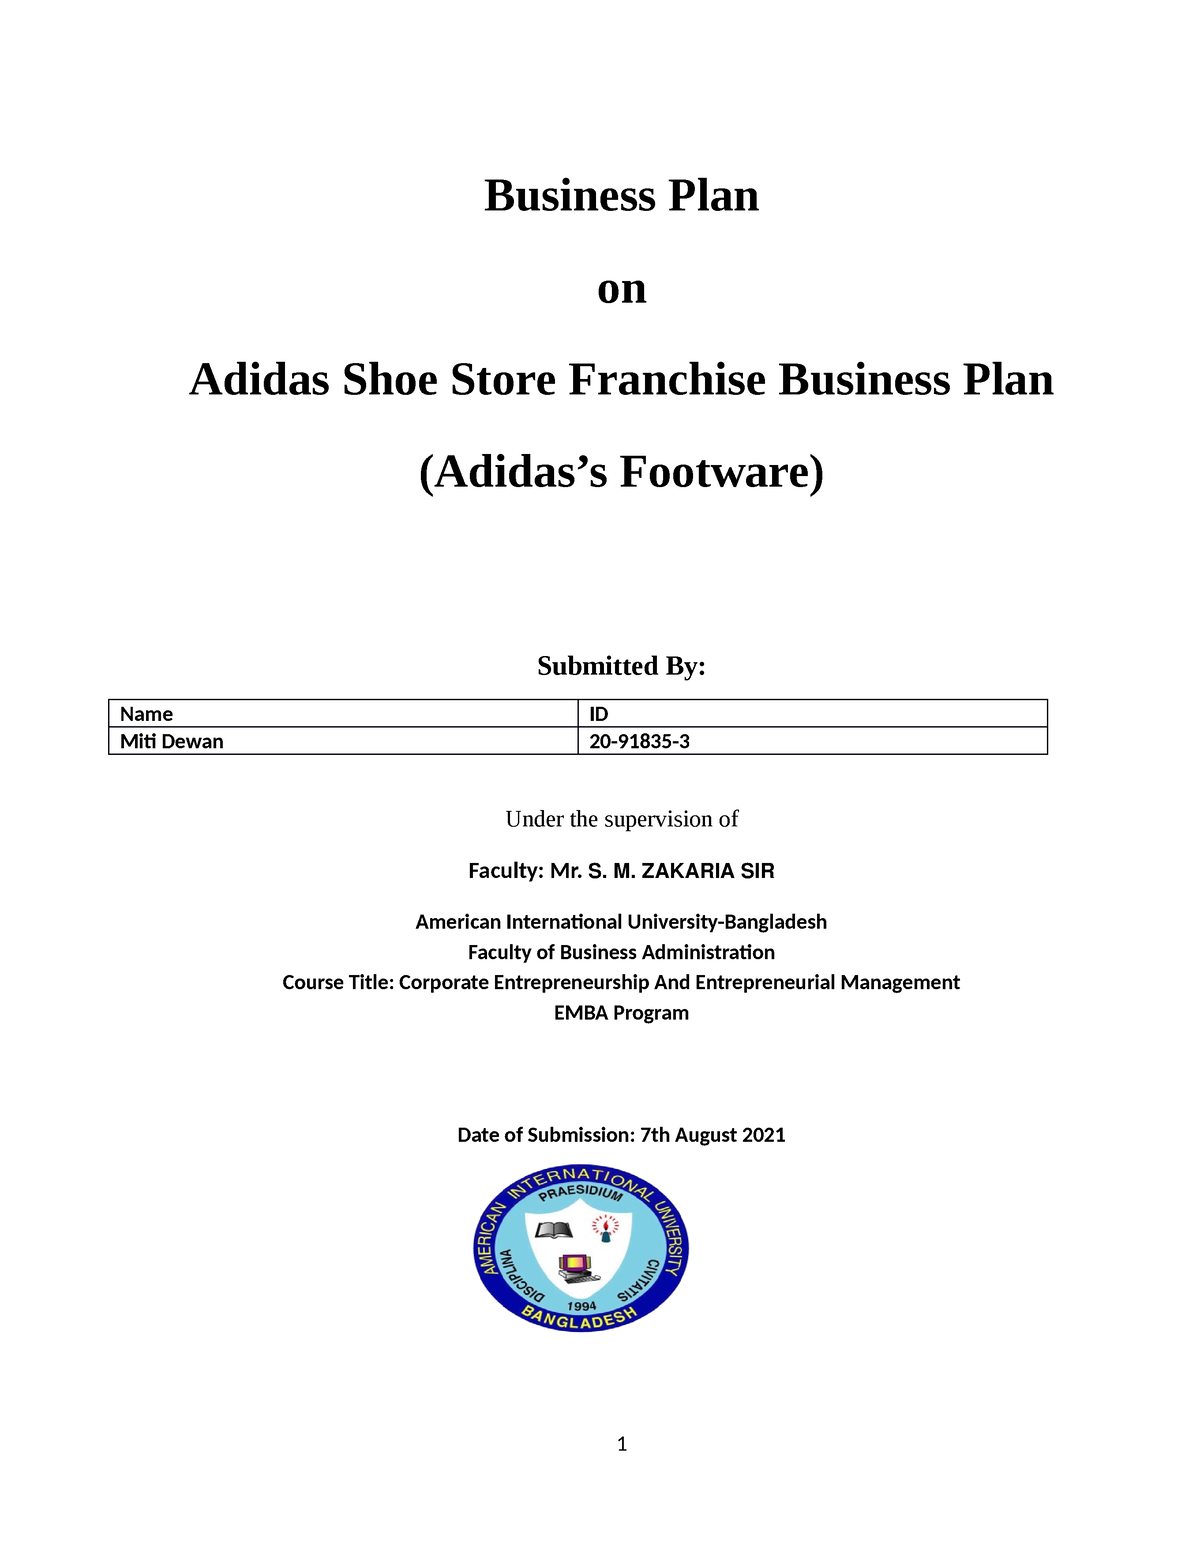 what is the business plan of adidas